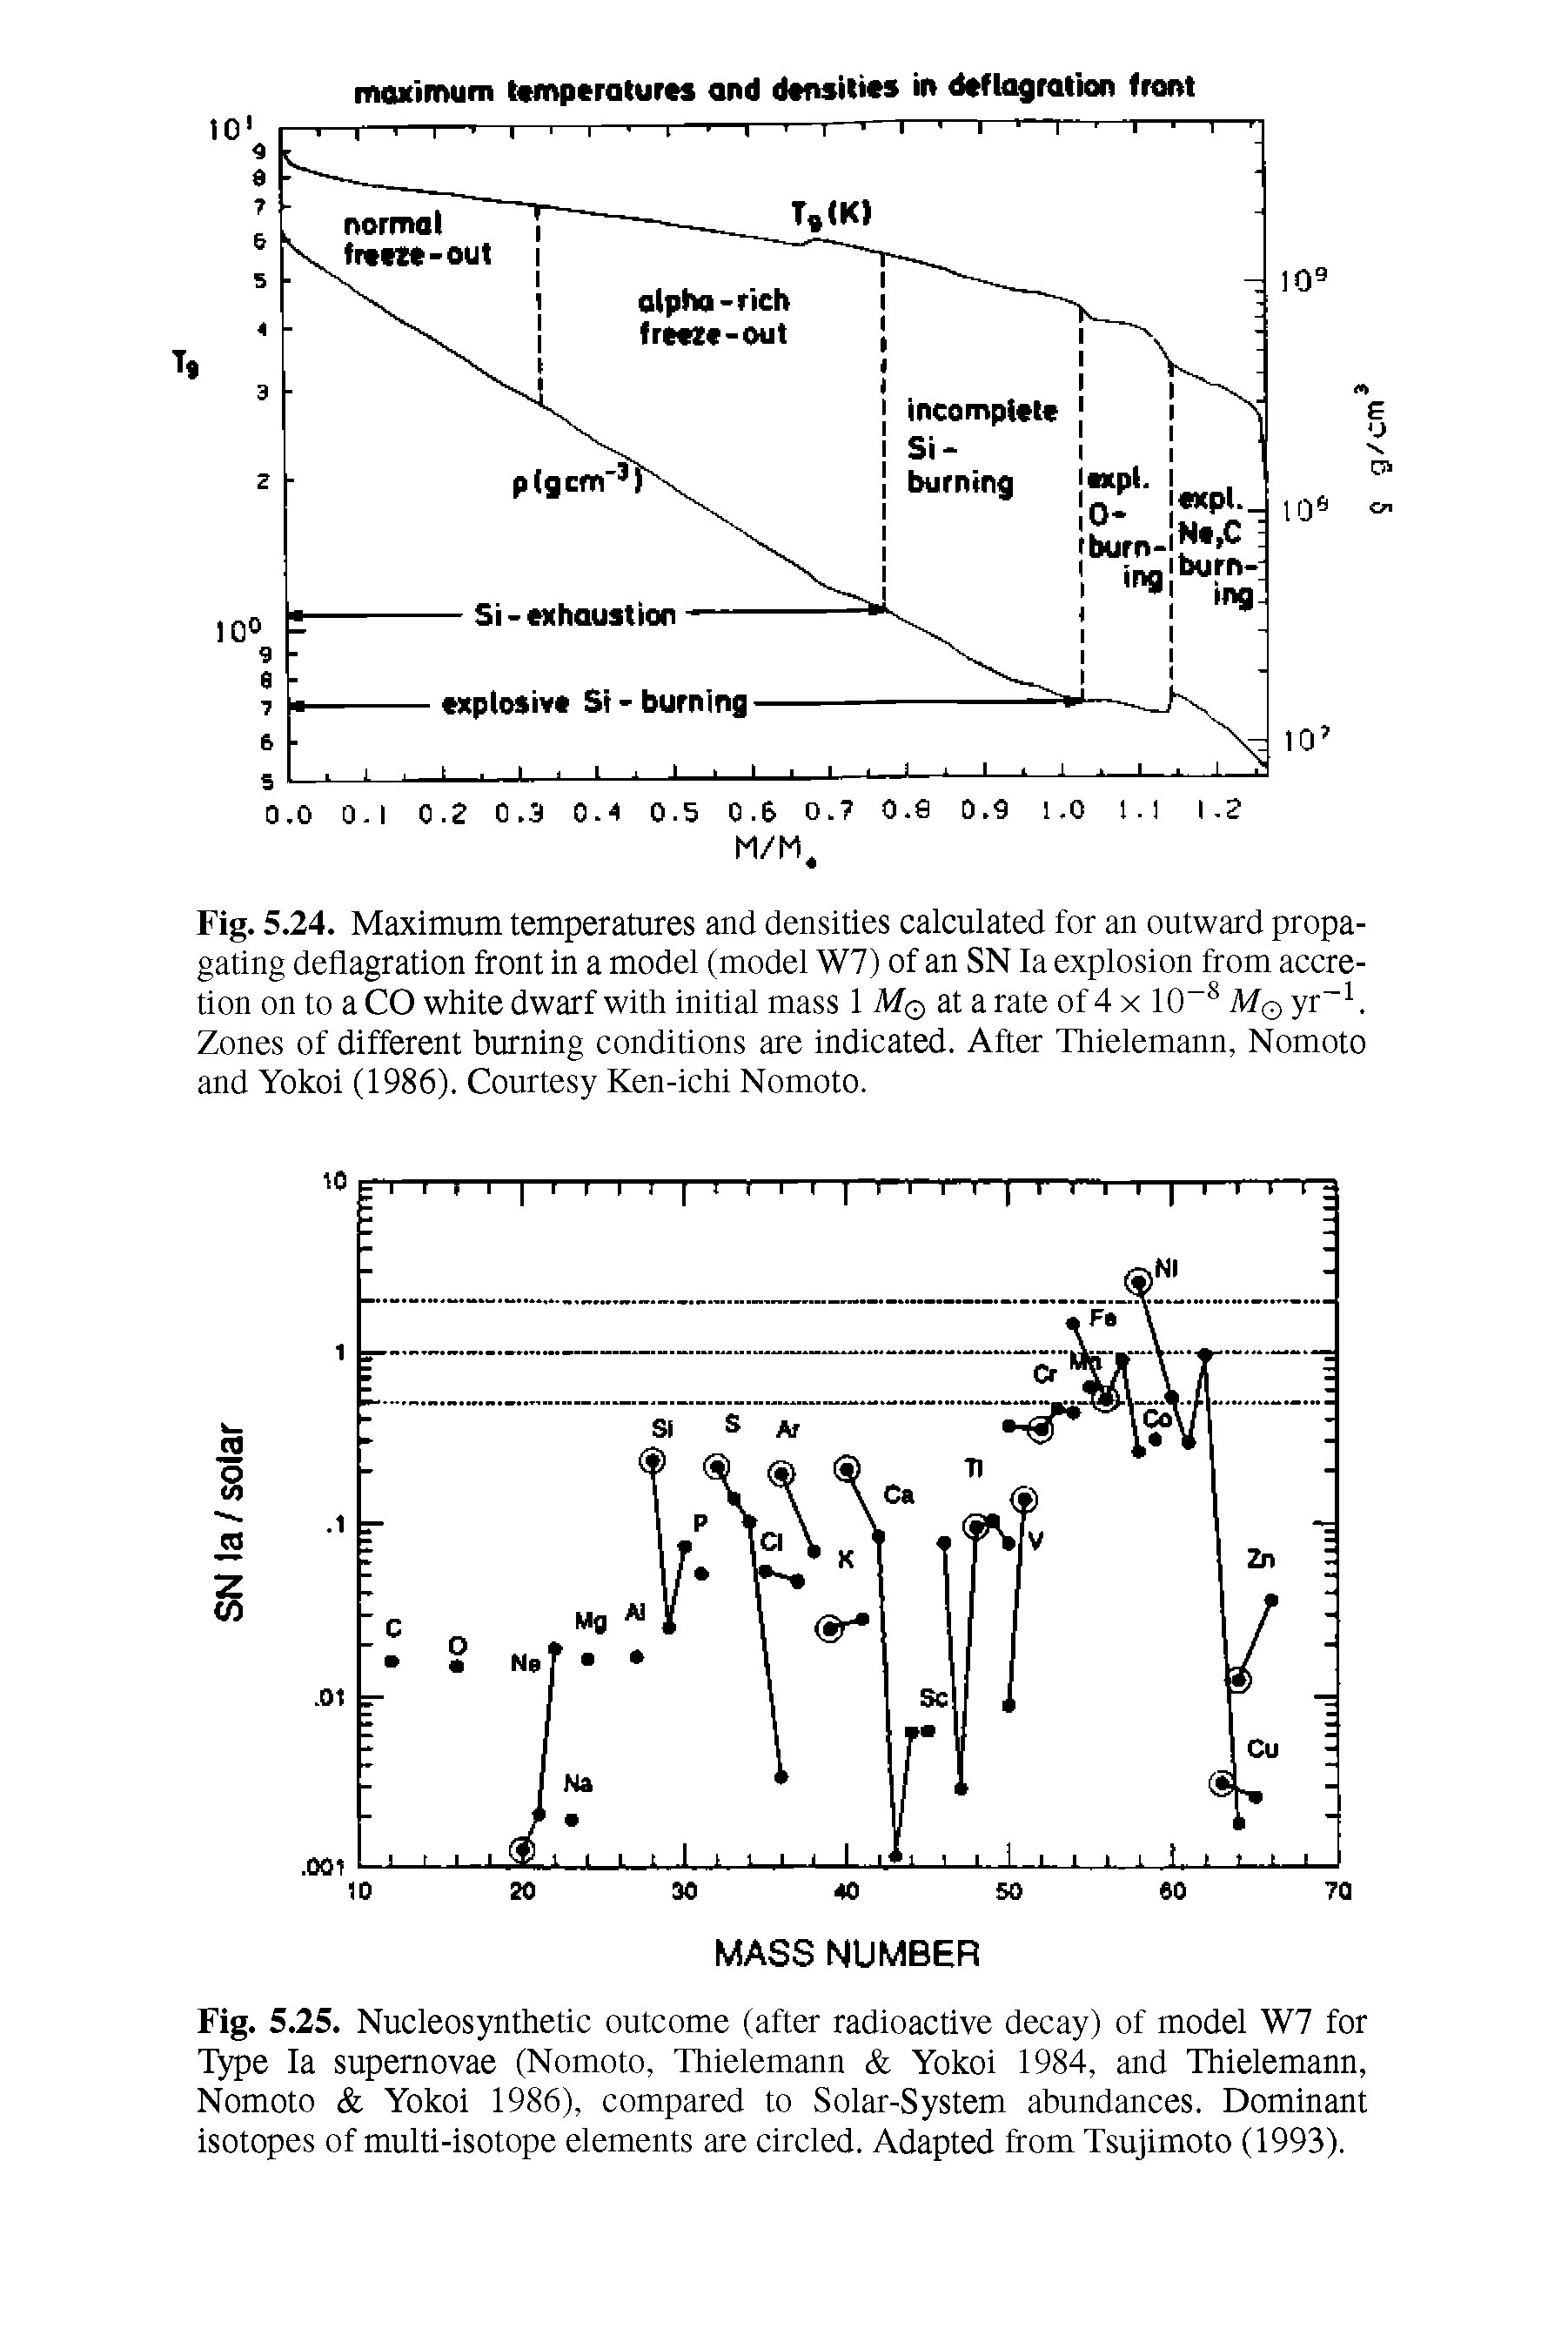 Fig. 5.24. Maximum temperatures and densities calculated for an outward propagating deflagration front in a model (model W7) of an SN la explosion from accretion on to a CO white dwarf with initial mass 1 M at a rate of 4 x 10-8 M yr 1. Zones of different burning conditions are indicated. After Thielemann, Nomoto and Yokoi (1986). Courtesy Ken-ichi Nomoto.